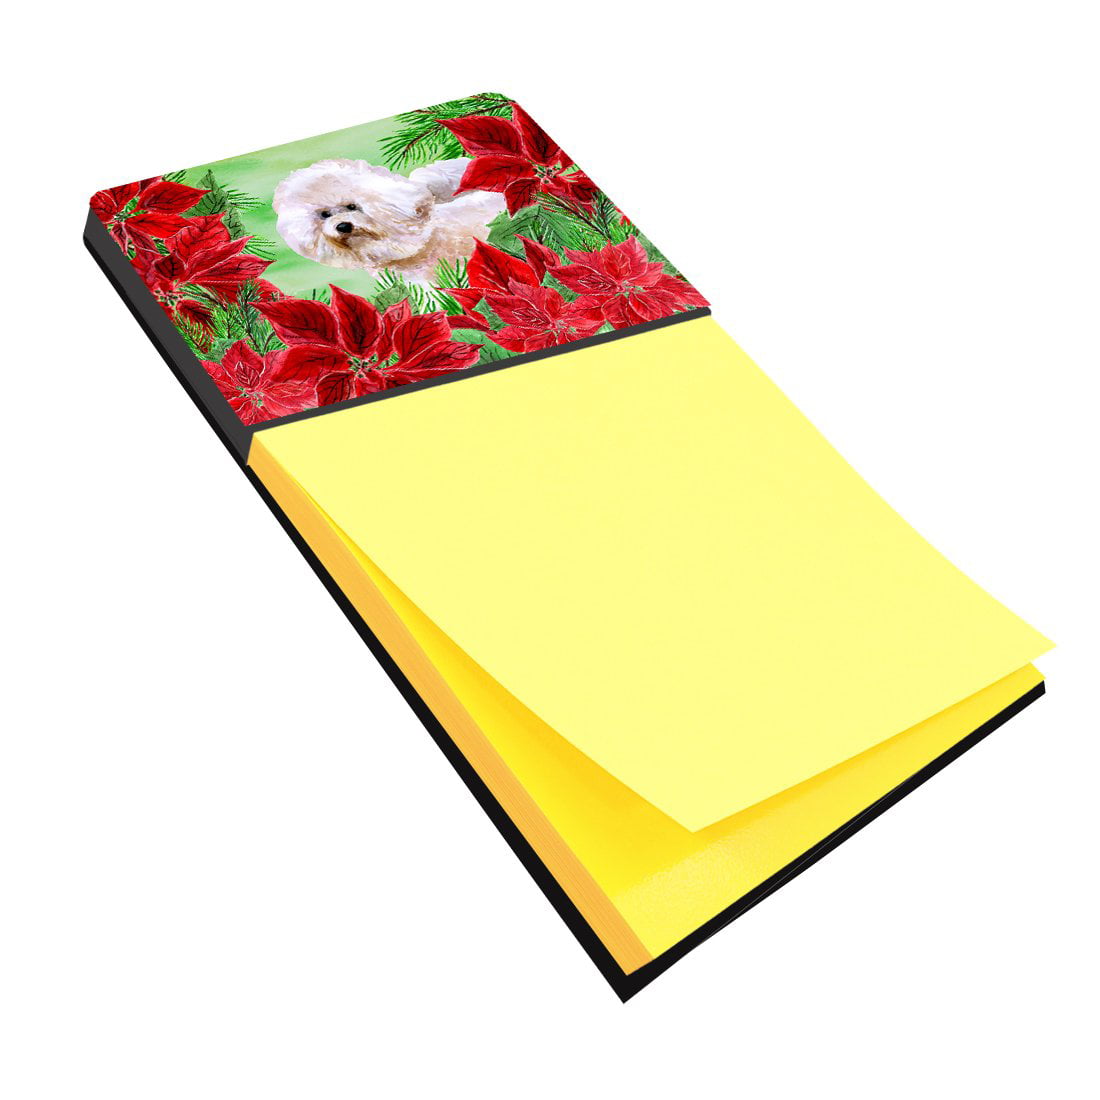 Picture of Carolines Treasures CK1353SN Bichon Frise No. 2 Poinsettas Sticky Note Holder